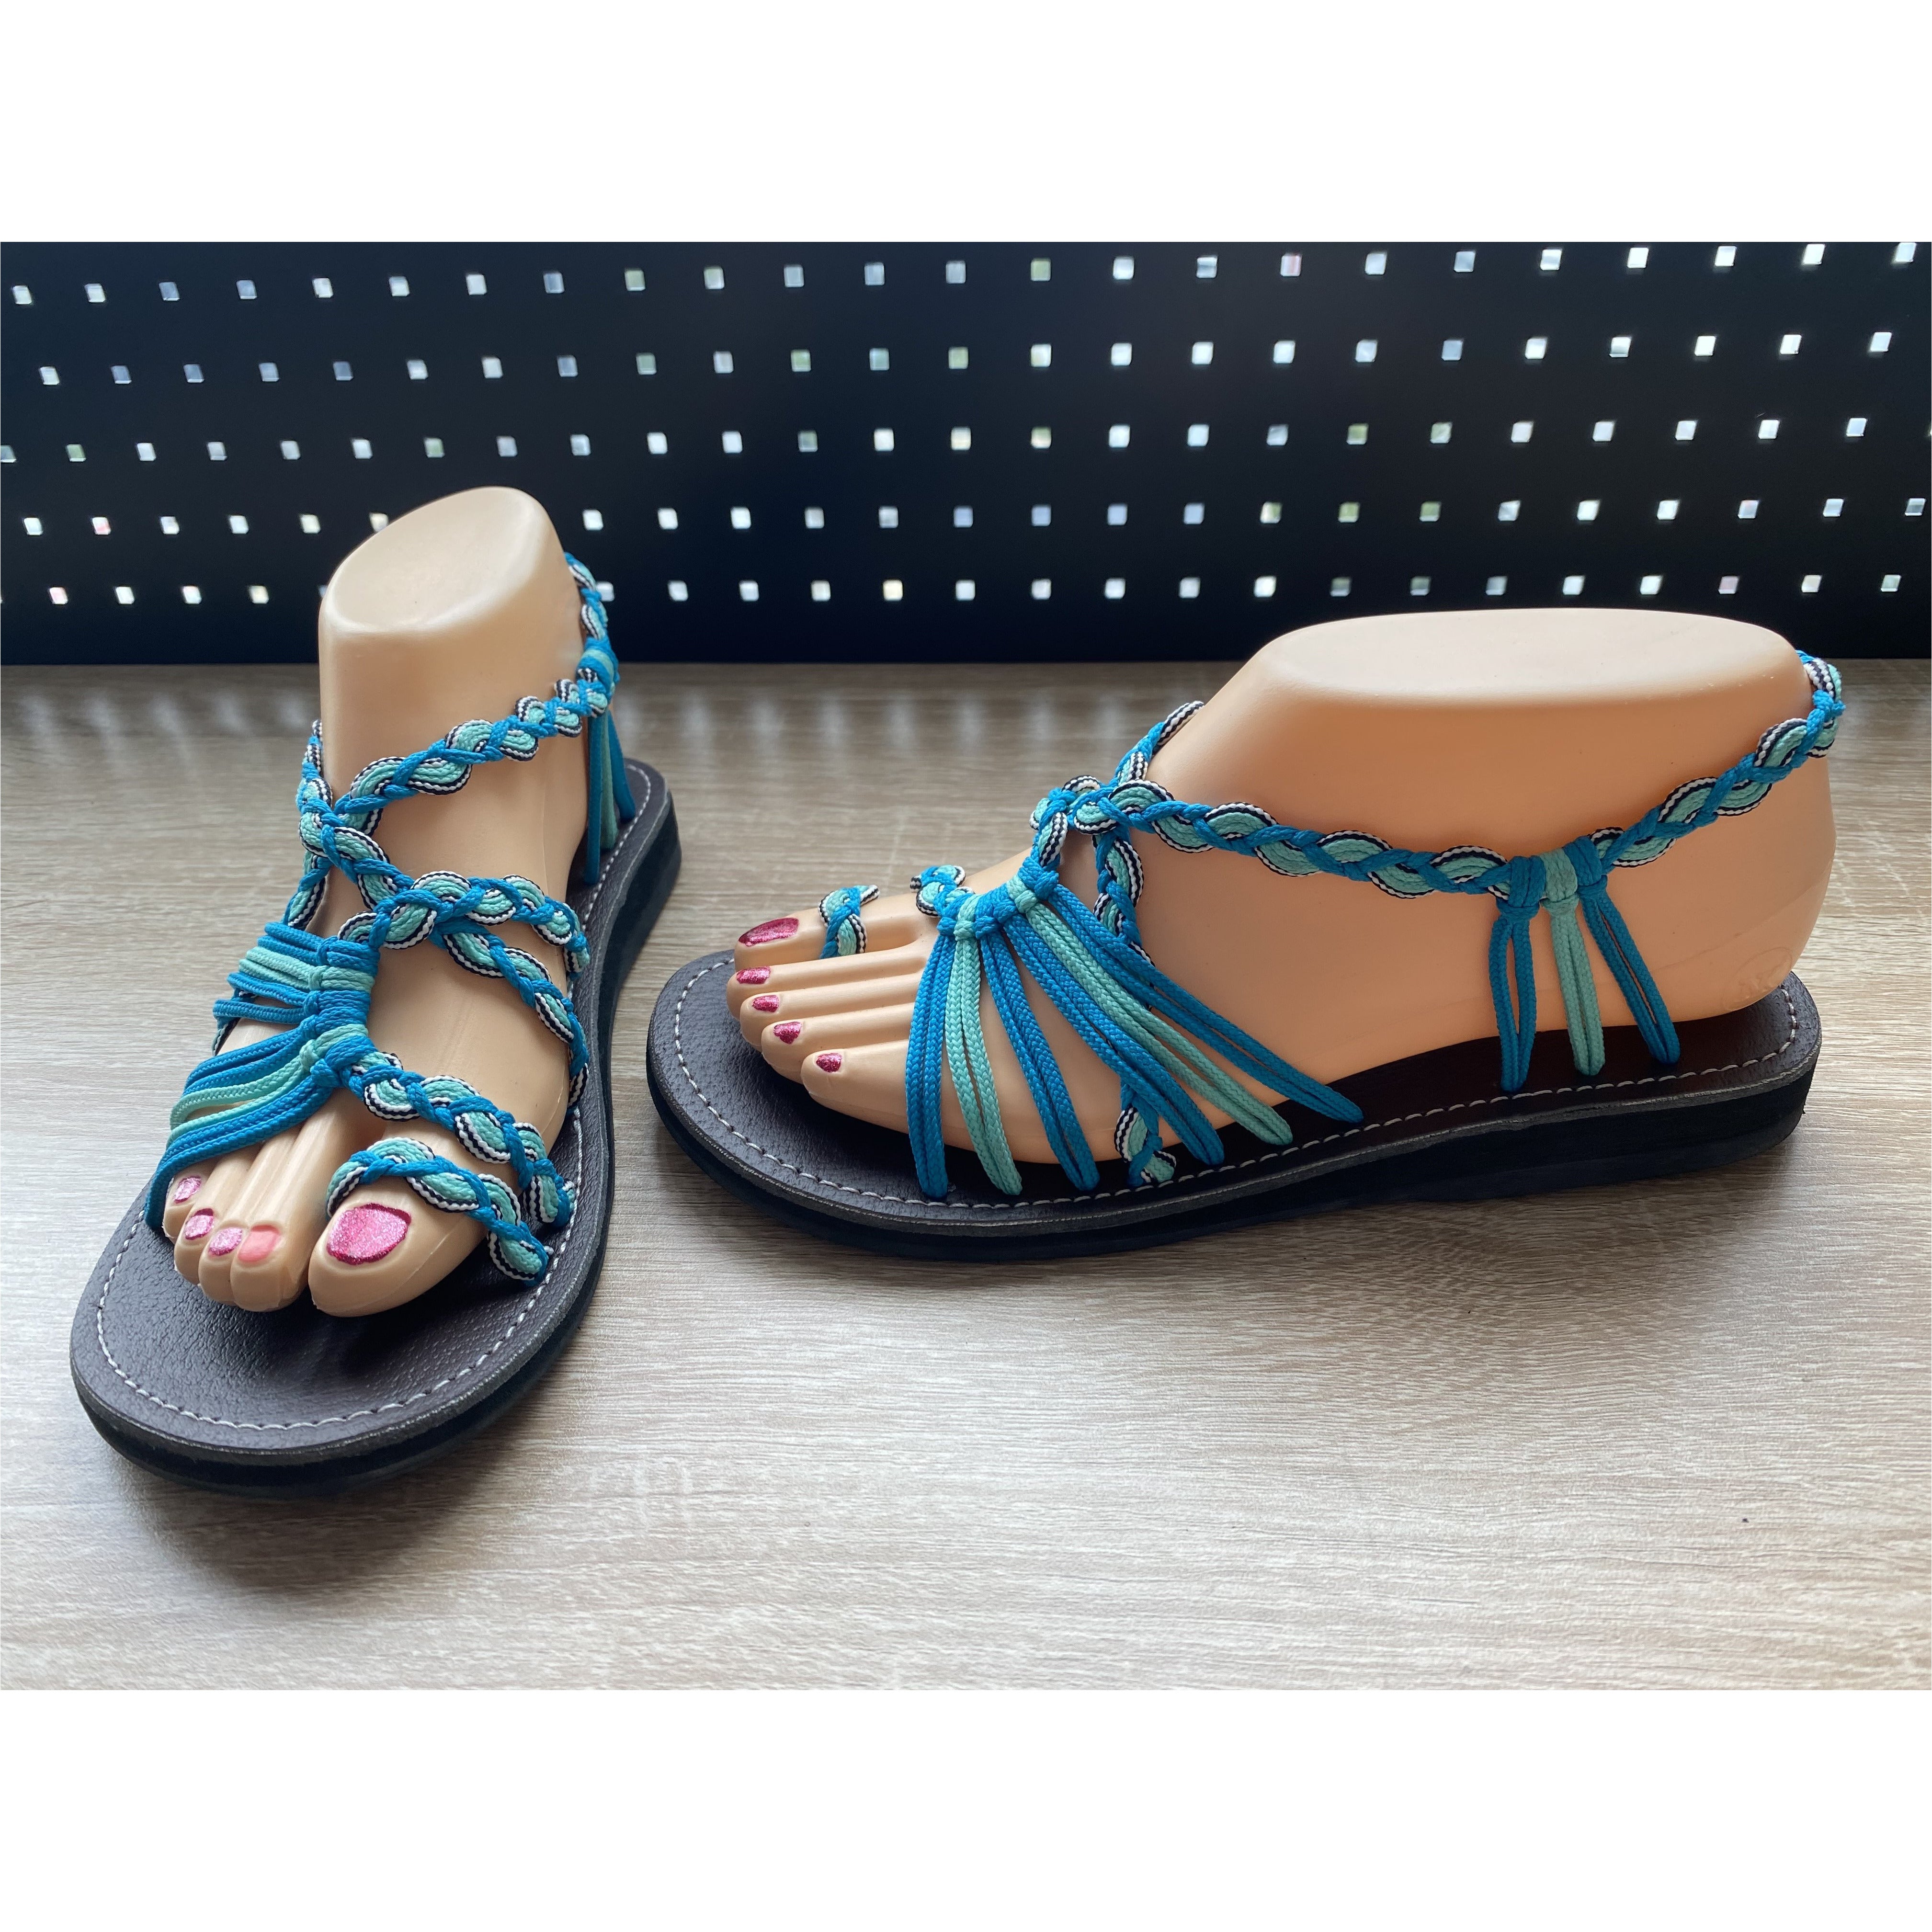 Shoes - Braided Sandal BLUE/TEAL